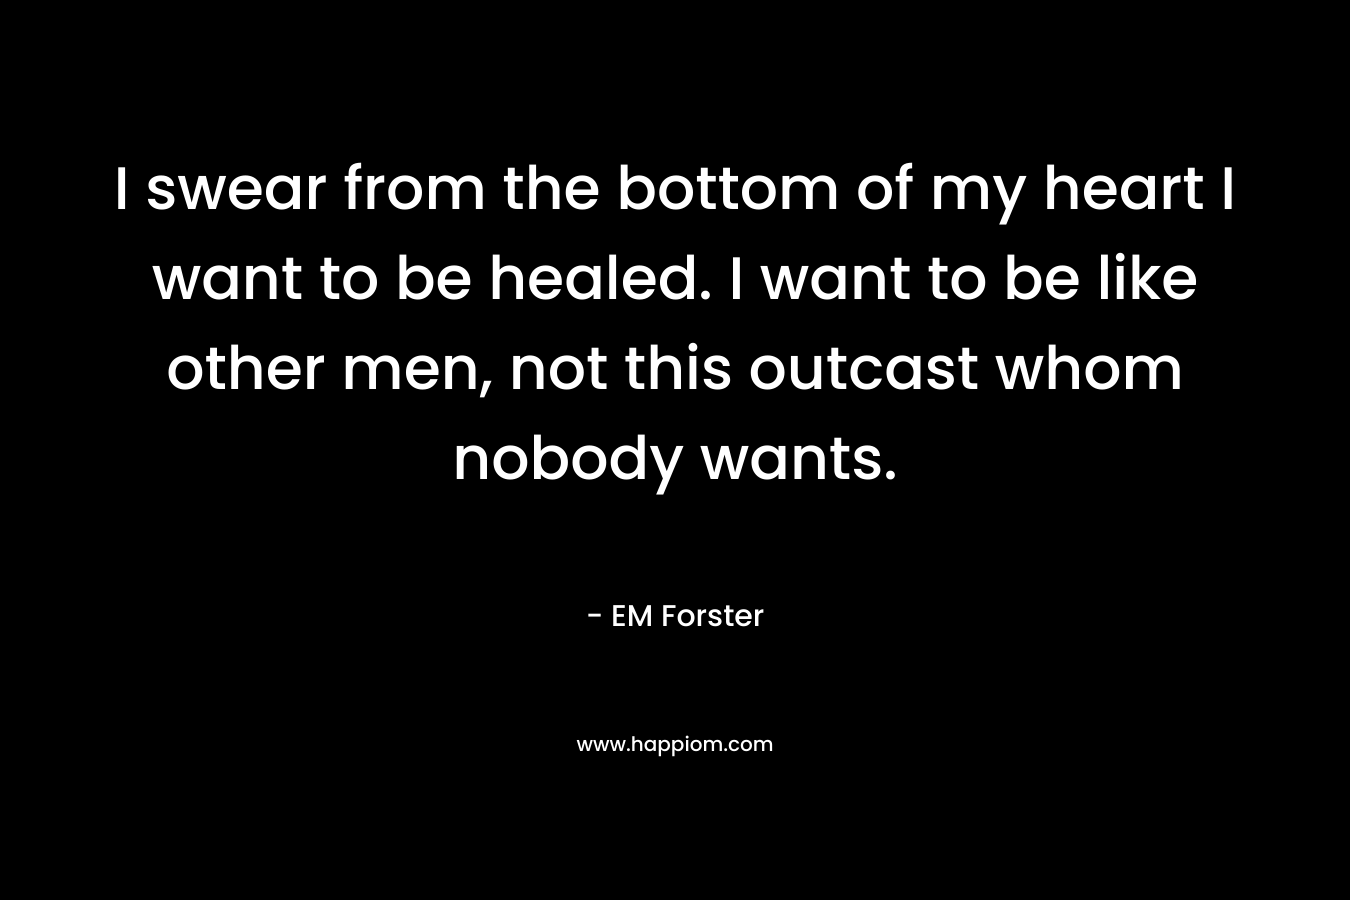 I swear from the bottom of my heart I want to be healed. I want to be like other men, not this outcast whom nobody wants. – EM Forster